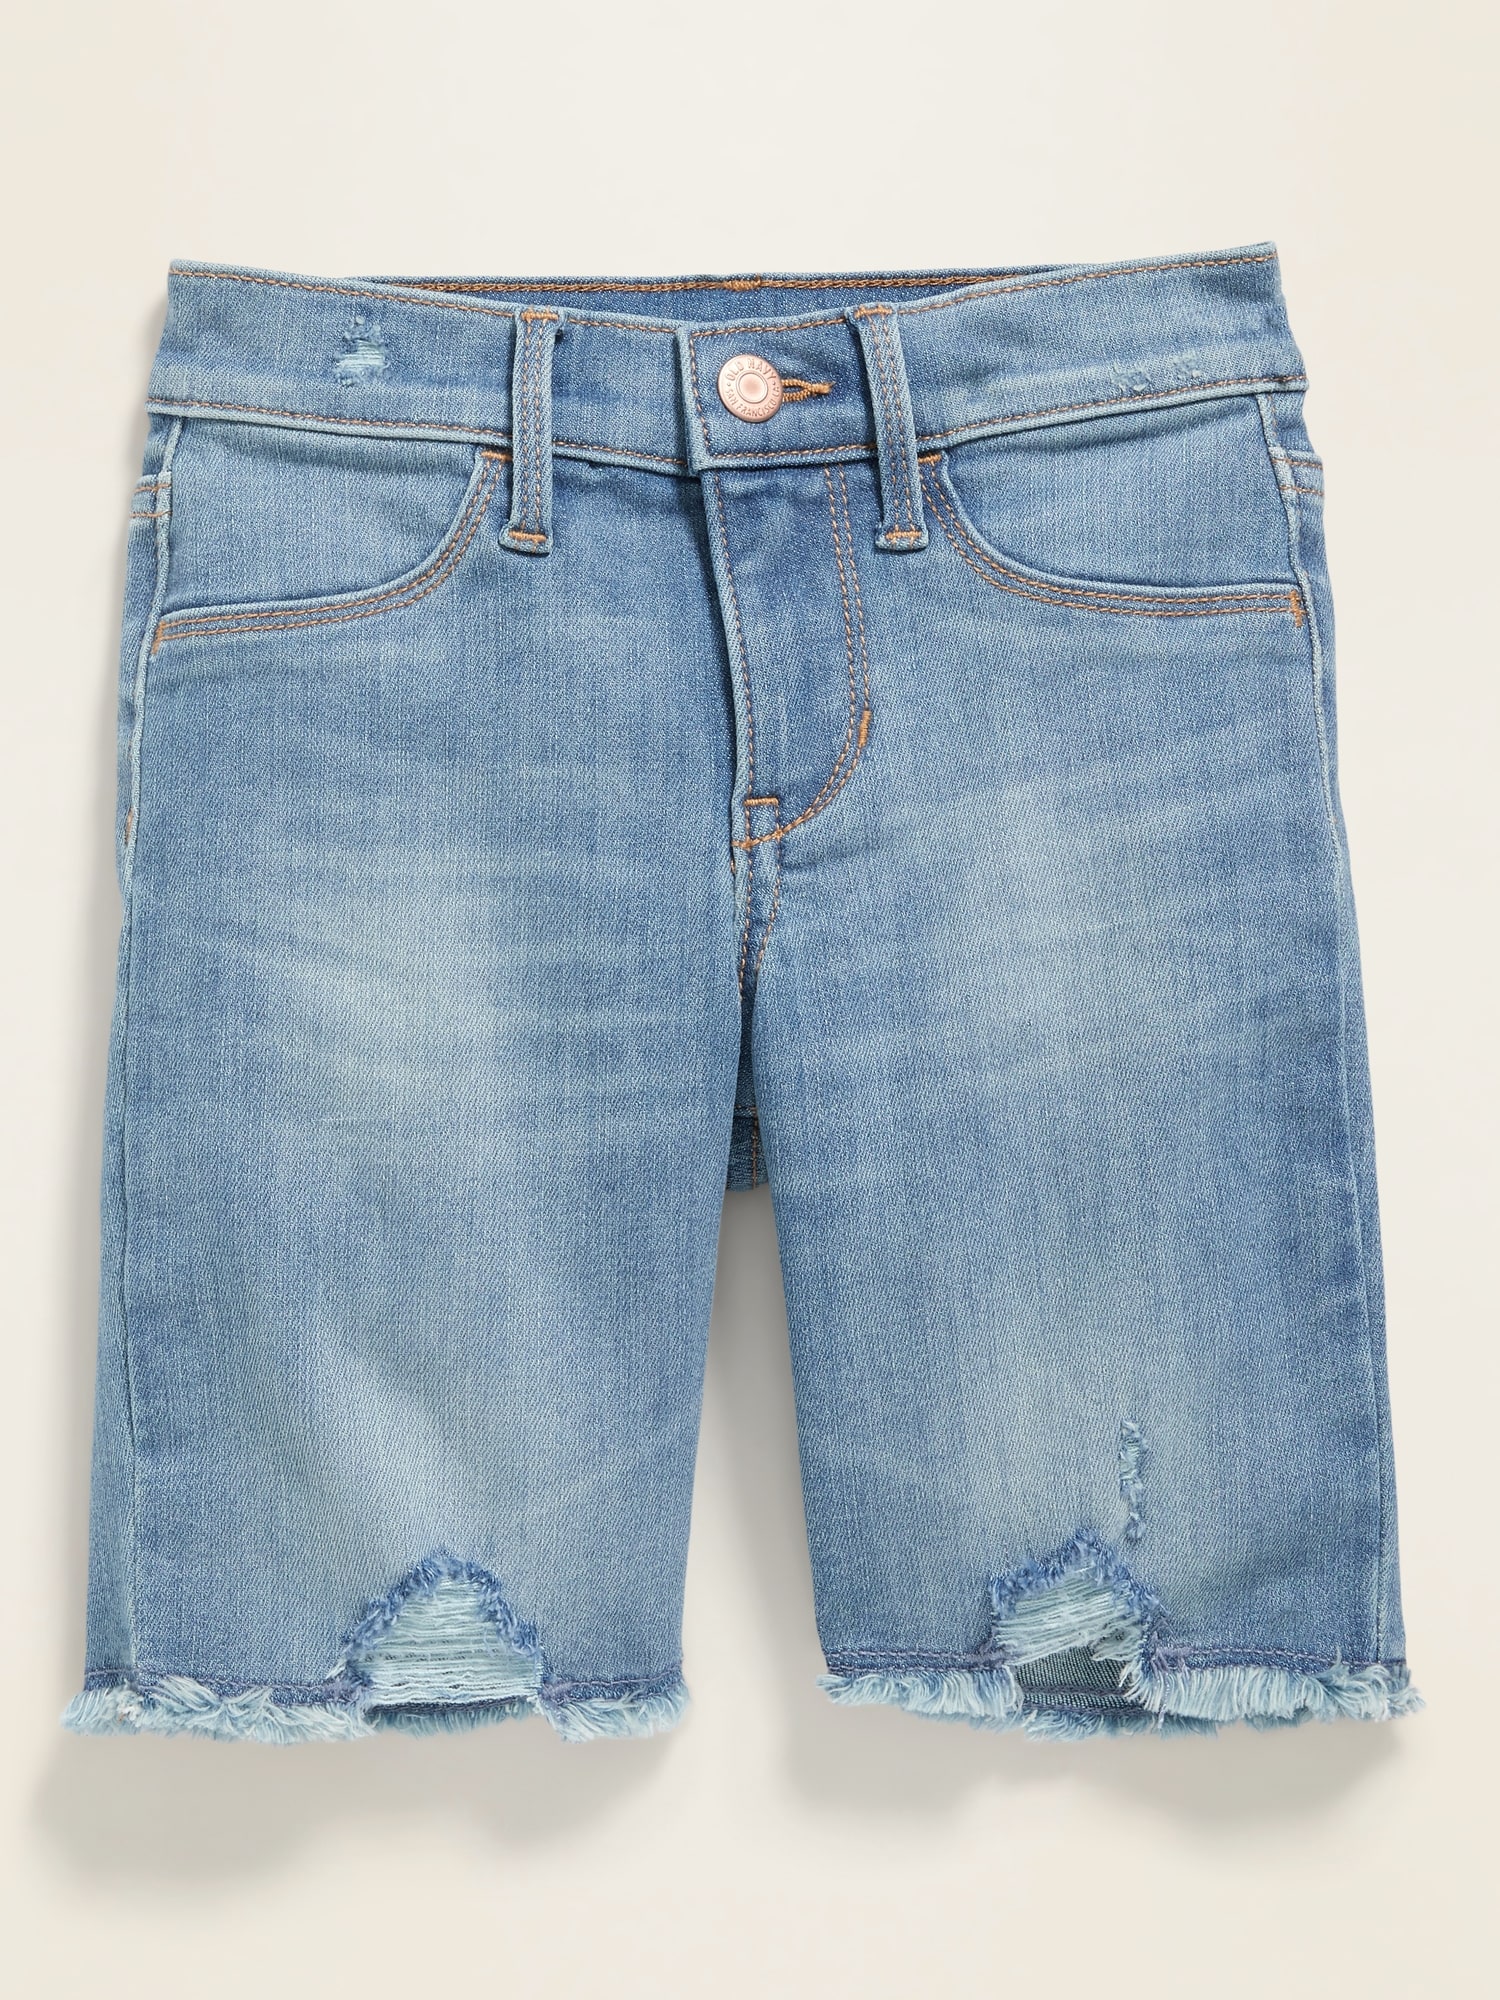 Ballerina 360° Stretch Distressed Cut-Off Jean Shorts for Girls | Old Navy